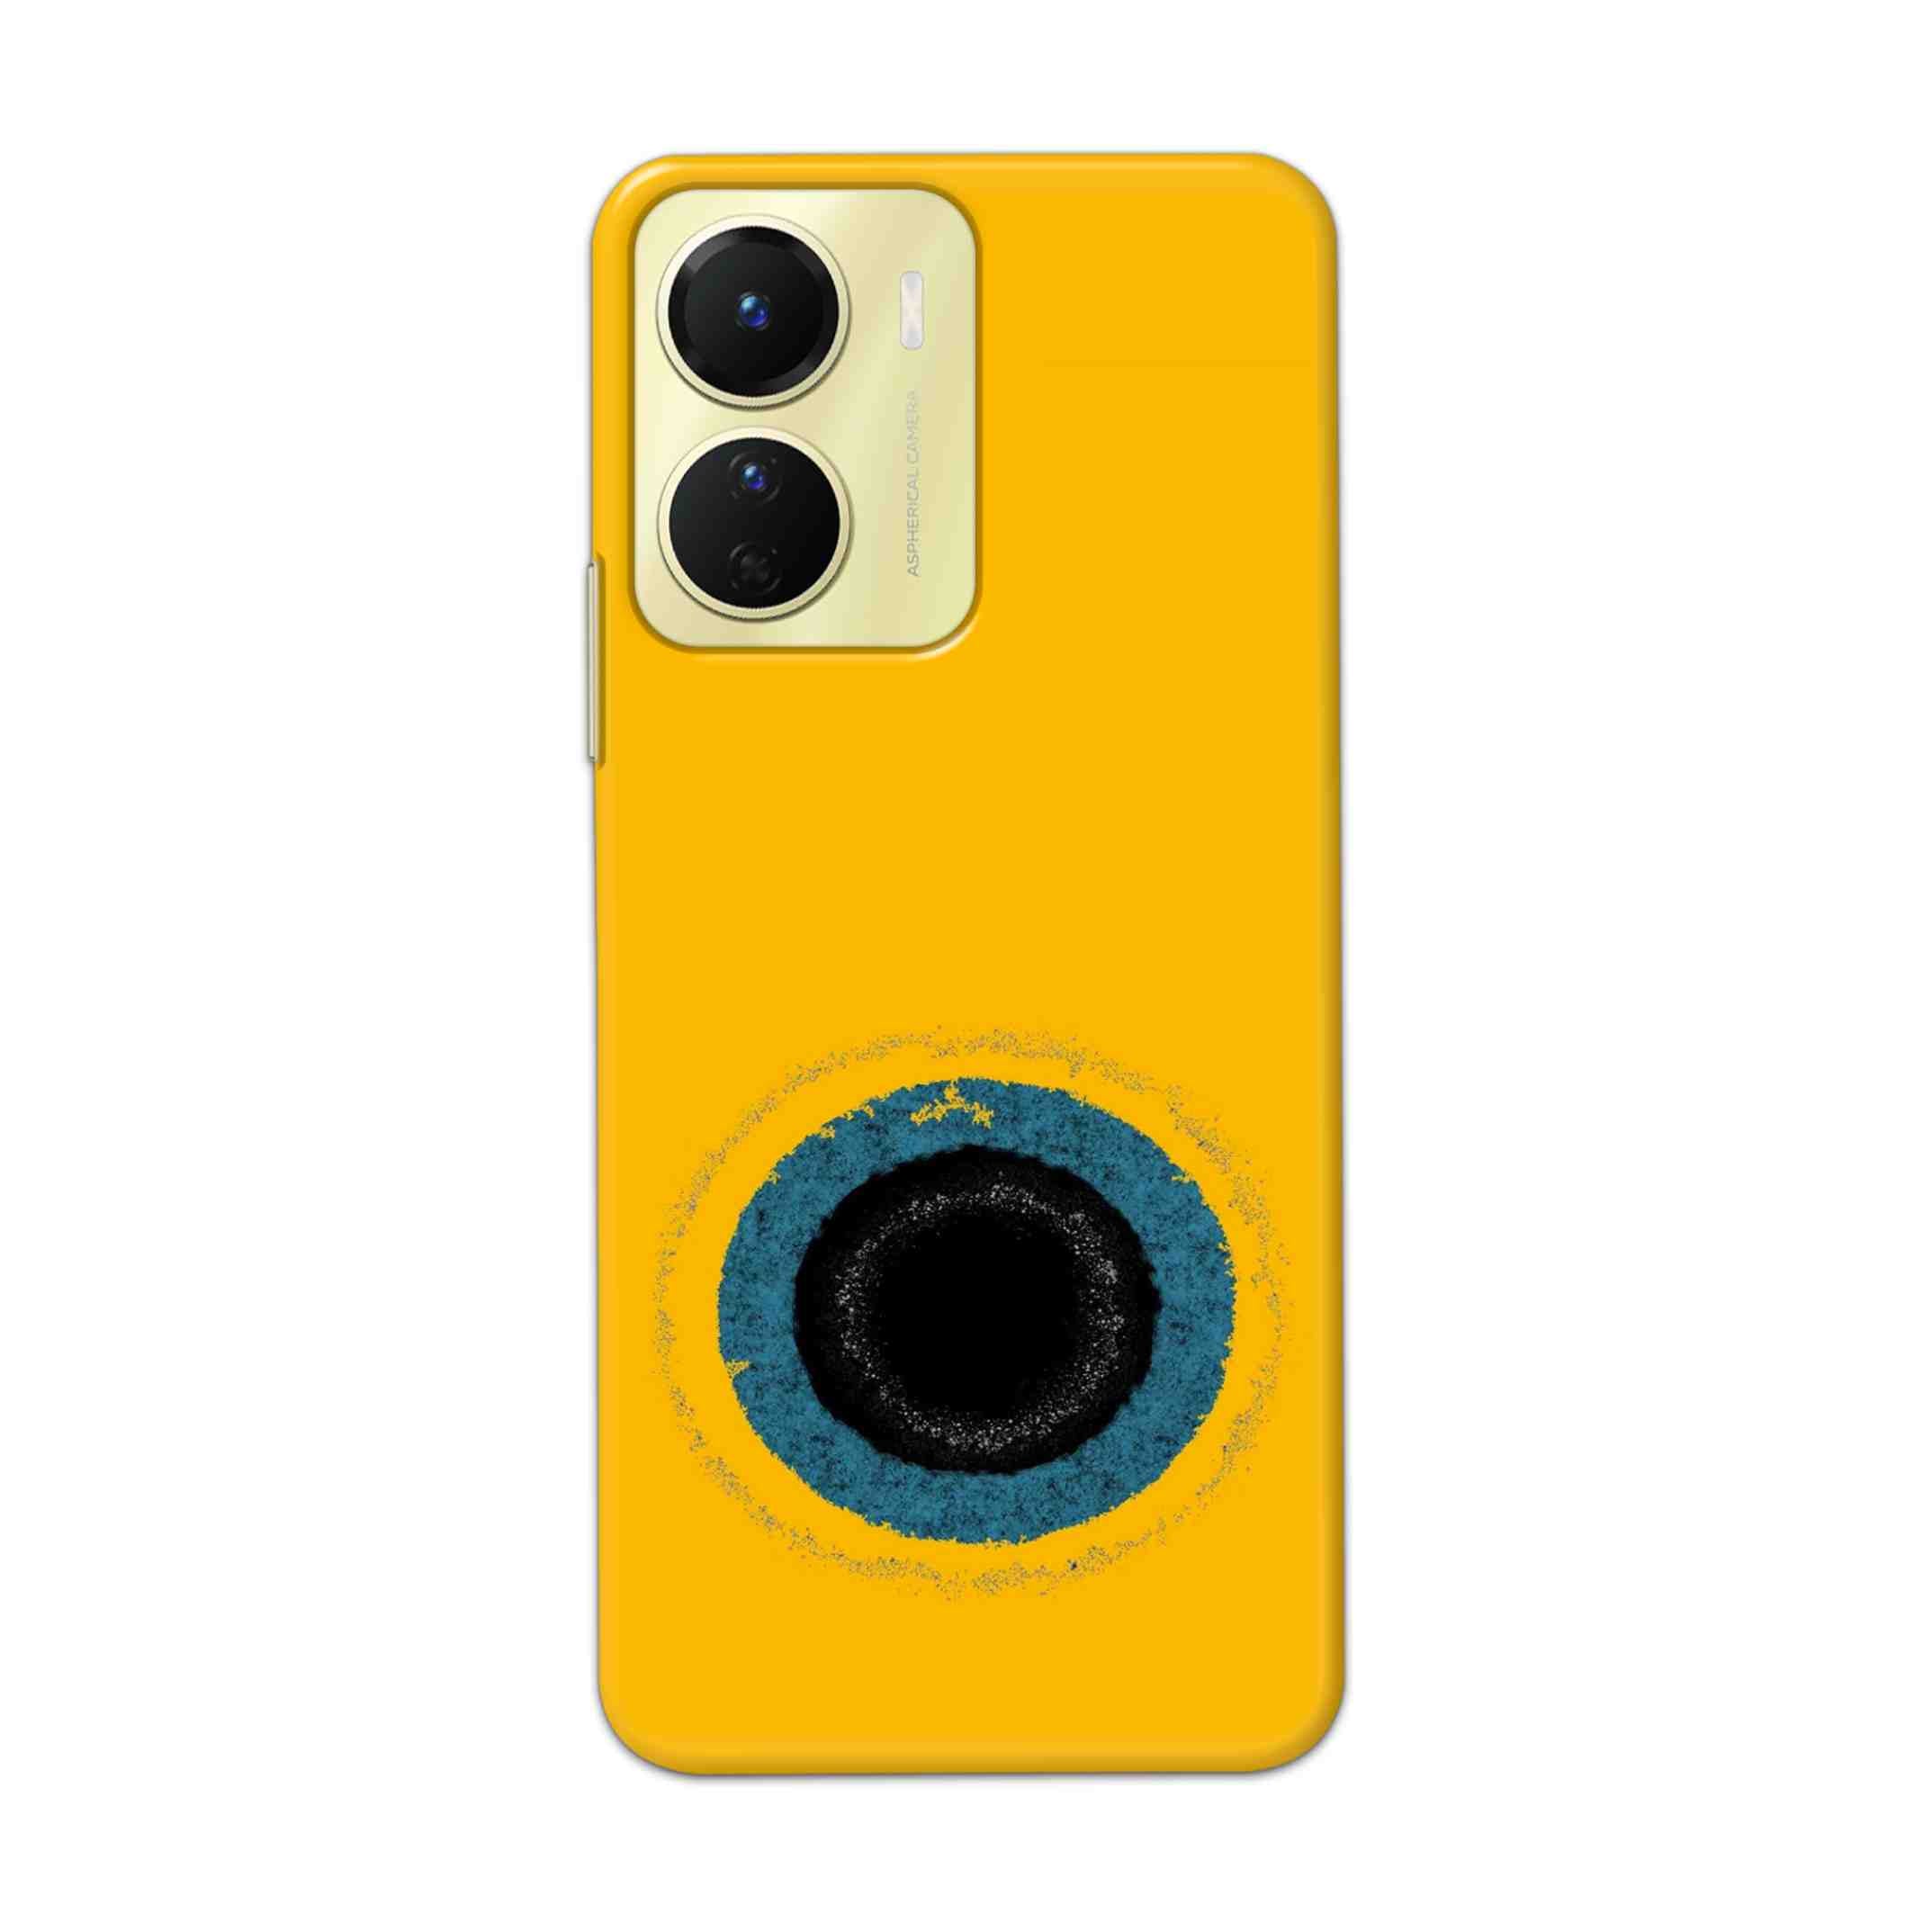 Buy Dark Hole With Yellow Background Hard Back Mobile Phone Case Cover For Vivo Y16 Online